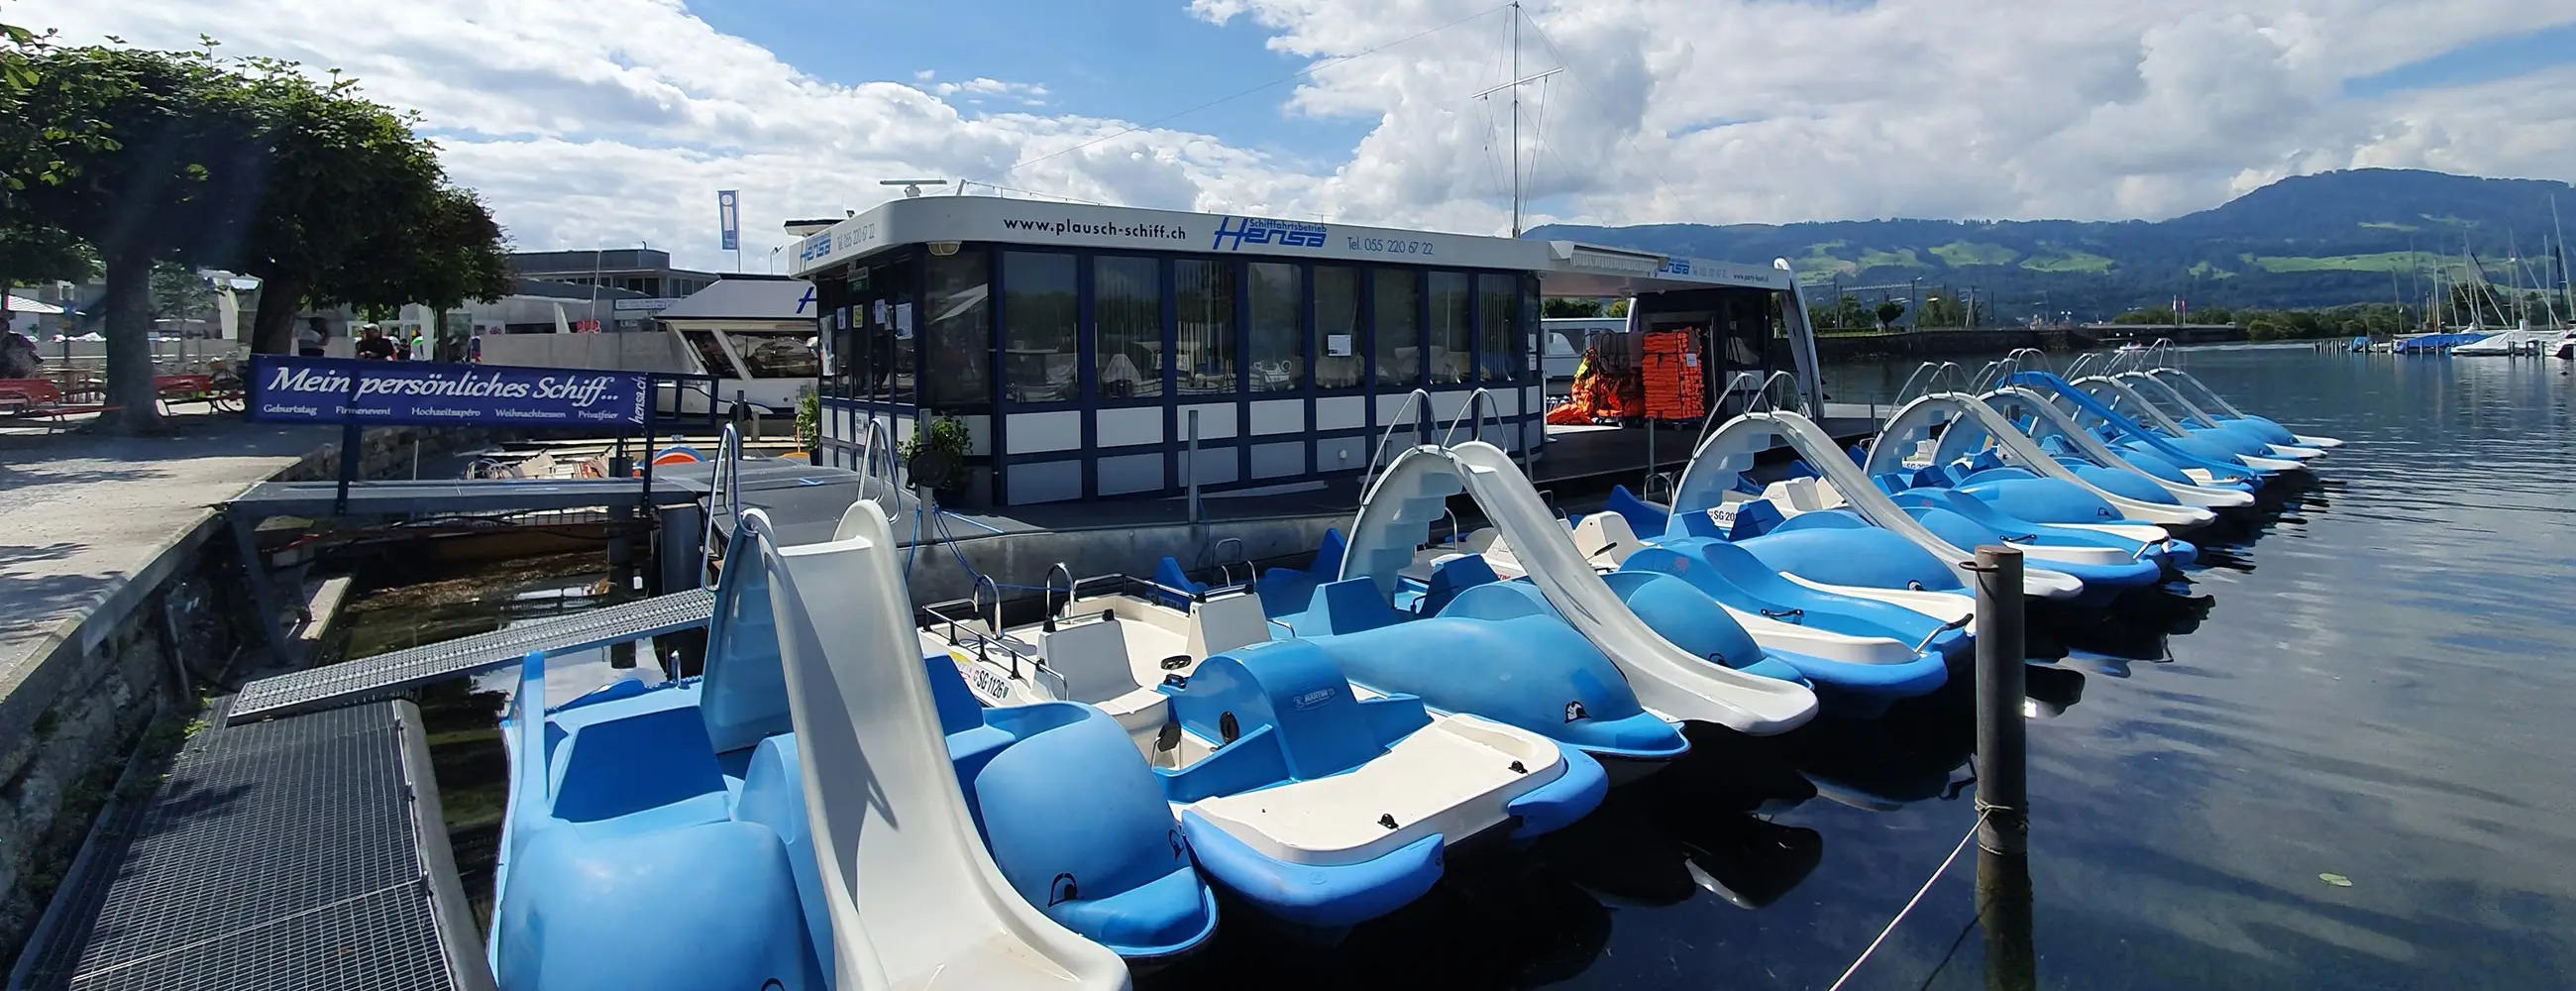 pedalo-hensa-werft-rapperswil-01